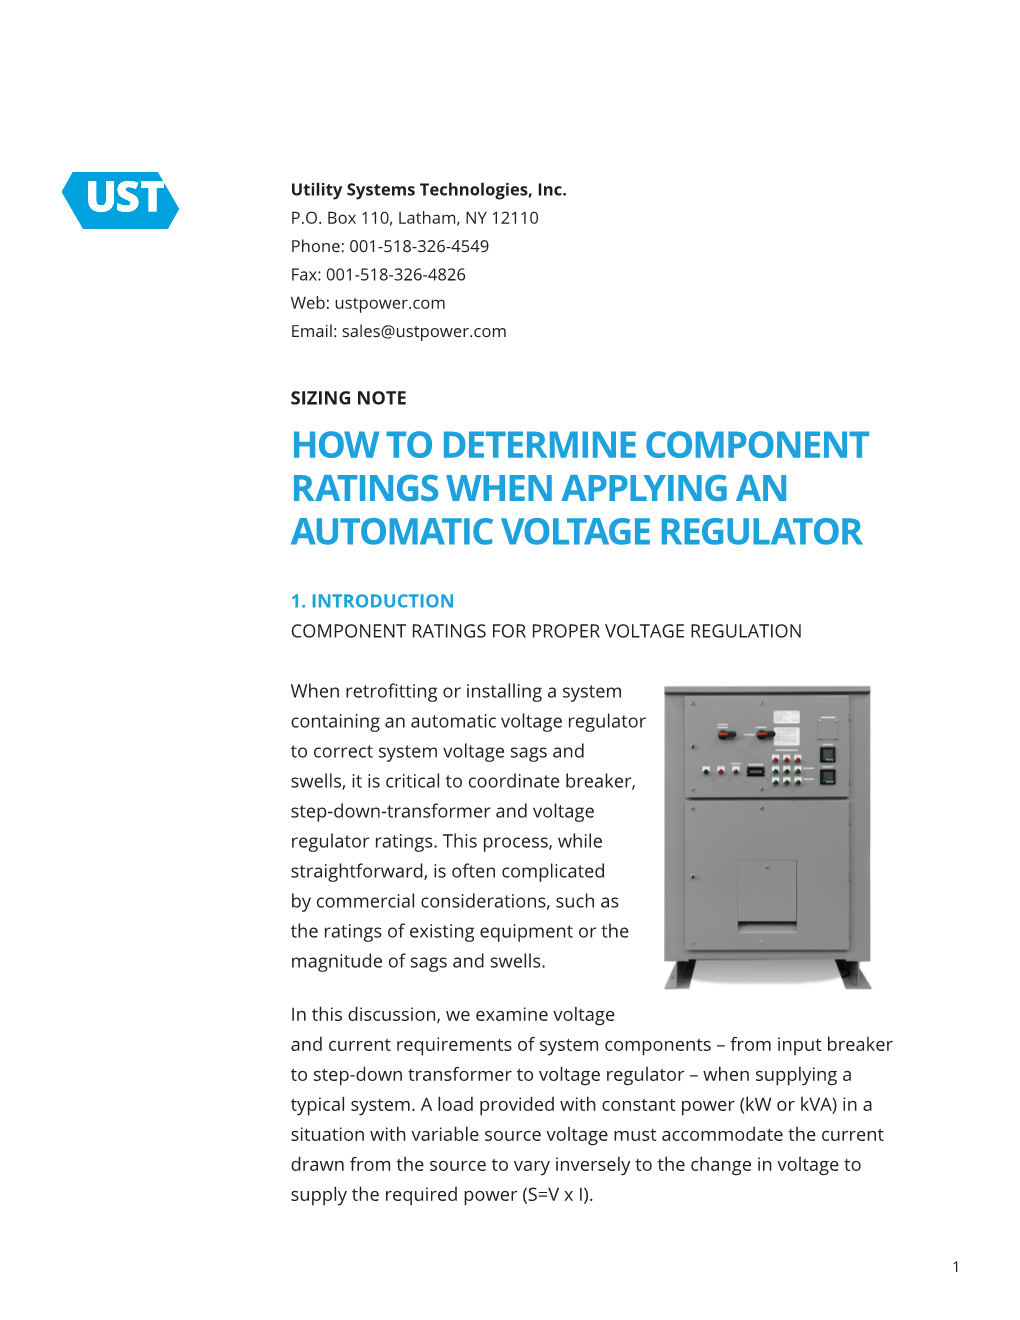 How to Determine Component Ratings When Applying an Automatic Voltage Regulator